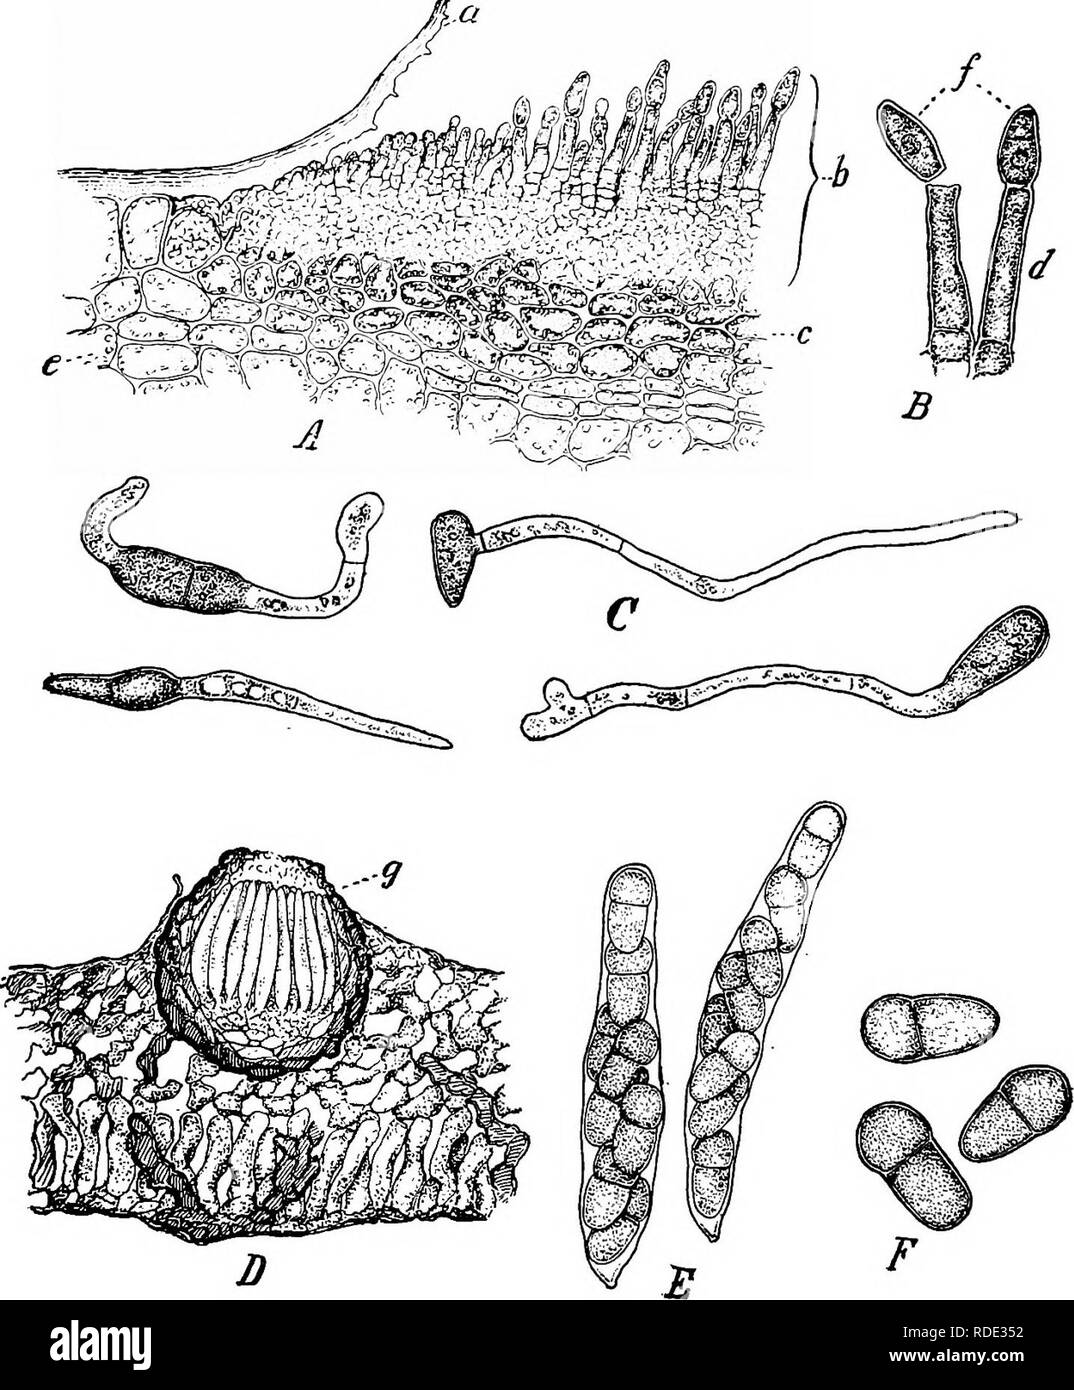 . Minnesota plant diseases. Plant diseases. 354 Minnesota Plant Diseases.. Fig. 187.—Spores of the apple scab fungus. A. Portion of a section through a scab spot on an apple; b, fungus threads spreading under and lifting the cuticle; a and c, partly disorganized cells of the apple; e, healthy cells of the apple. B. Two spore-bearing stalks giving rise to summer Spores. C. Spores germinating. D. Portion of a section through an affected leaf of an apple which has lain on the ground over winter and has given rise to the winter spore stage of the disease; g, spore-case containing a bundle of spore Stock Photo